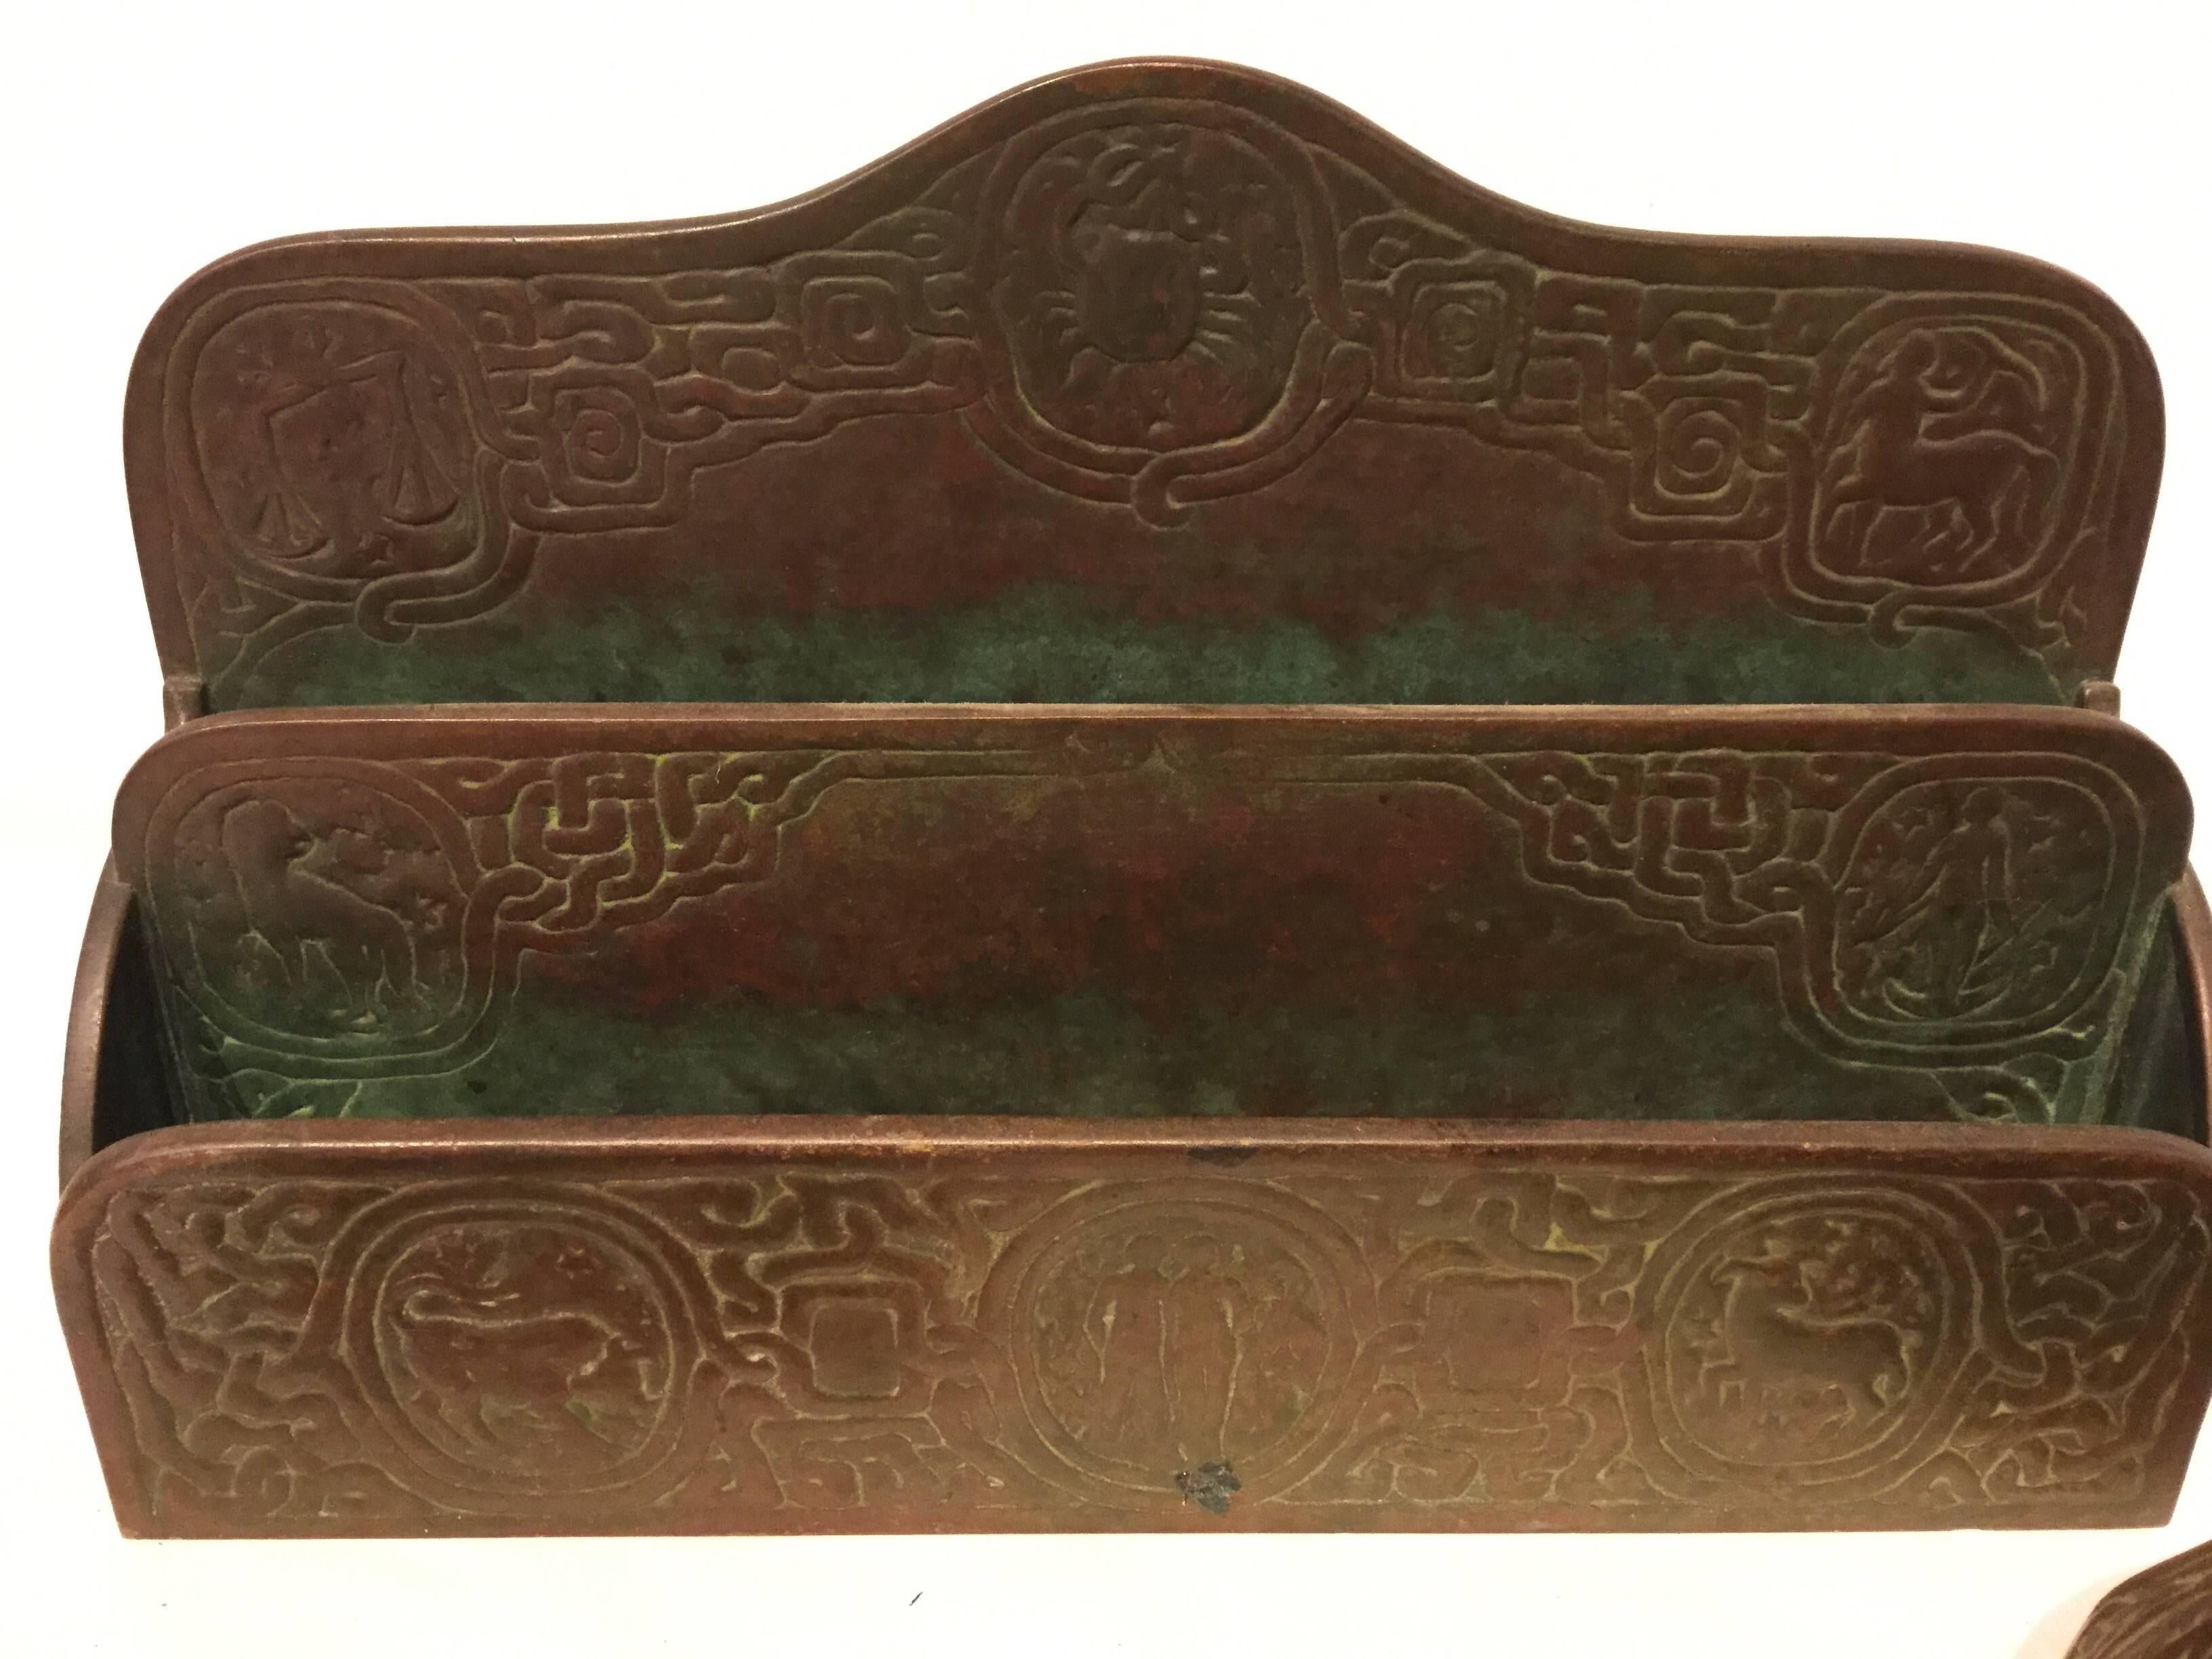 Beautiful patina on this four-piece Tiffany Zodiac bronze desk set. Made by Tiffany c 1905 at the height of the arts and crafts movement. The astrological motif design on the set was aptly named 